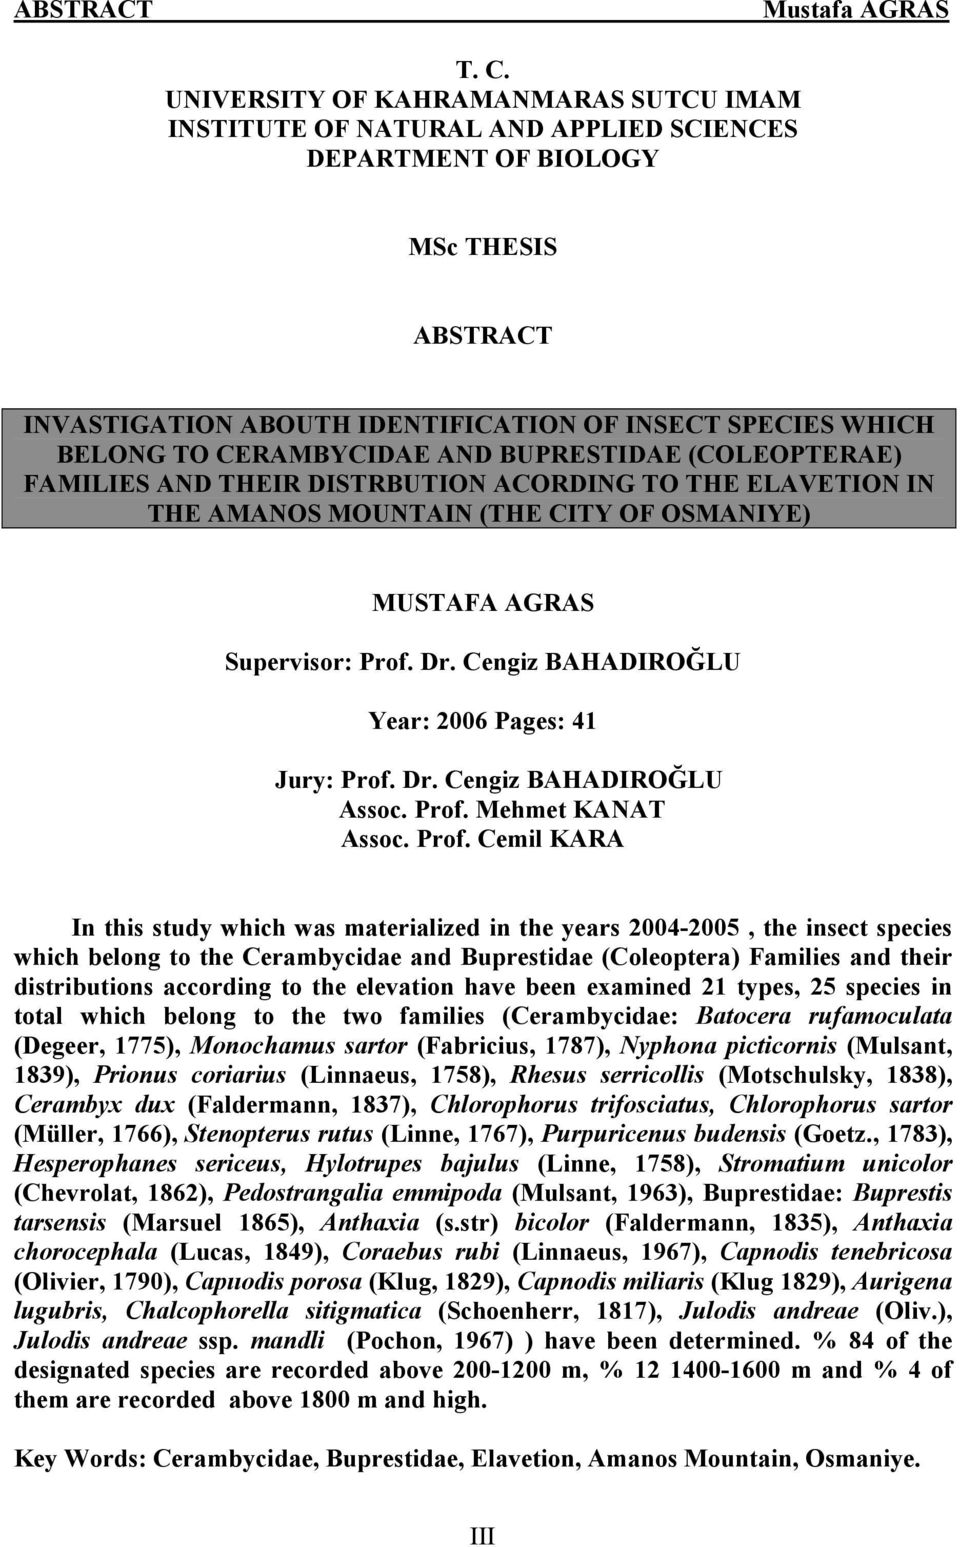 CERAMBYCIDAE AND BUPRESTIDAE (COLEOPTERAE) FAMILIES AND THEIR DISTRBUTION ACORDING TO THE ELAVETION IN THE AMANOS MOUNTAIN (THE CITY OF OSMANIYE) MUSTAFA AGRAS Supervisor: Prof. Dr.